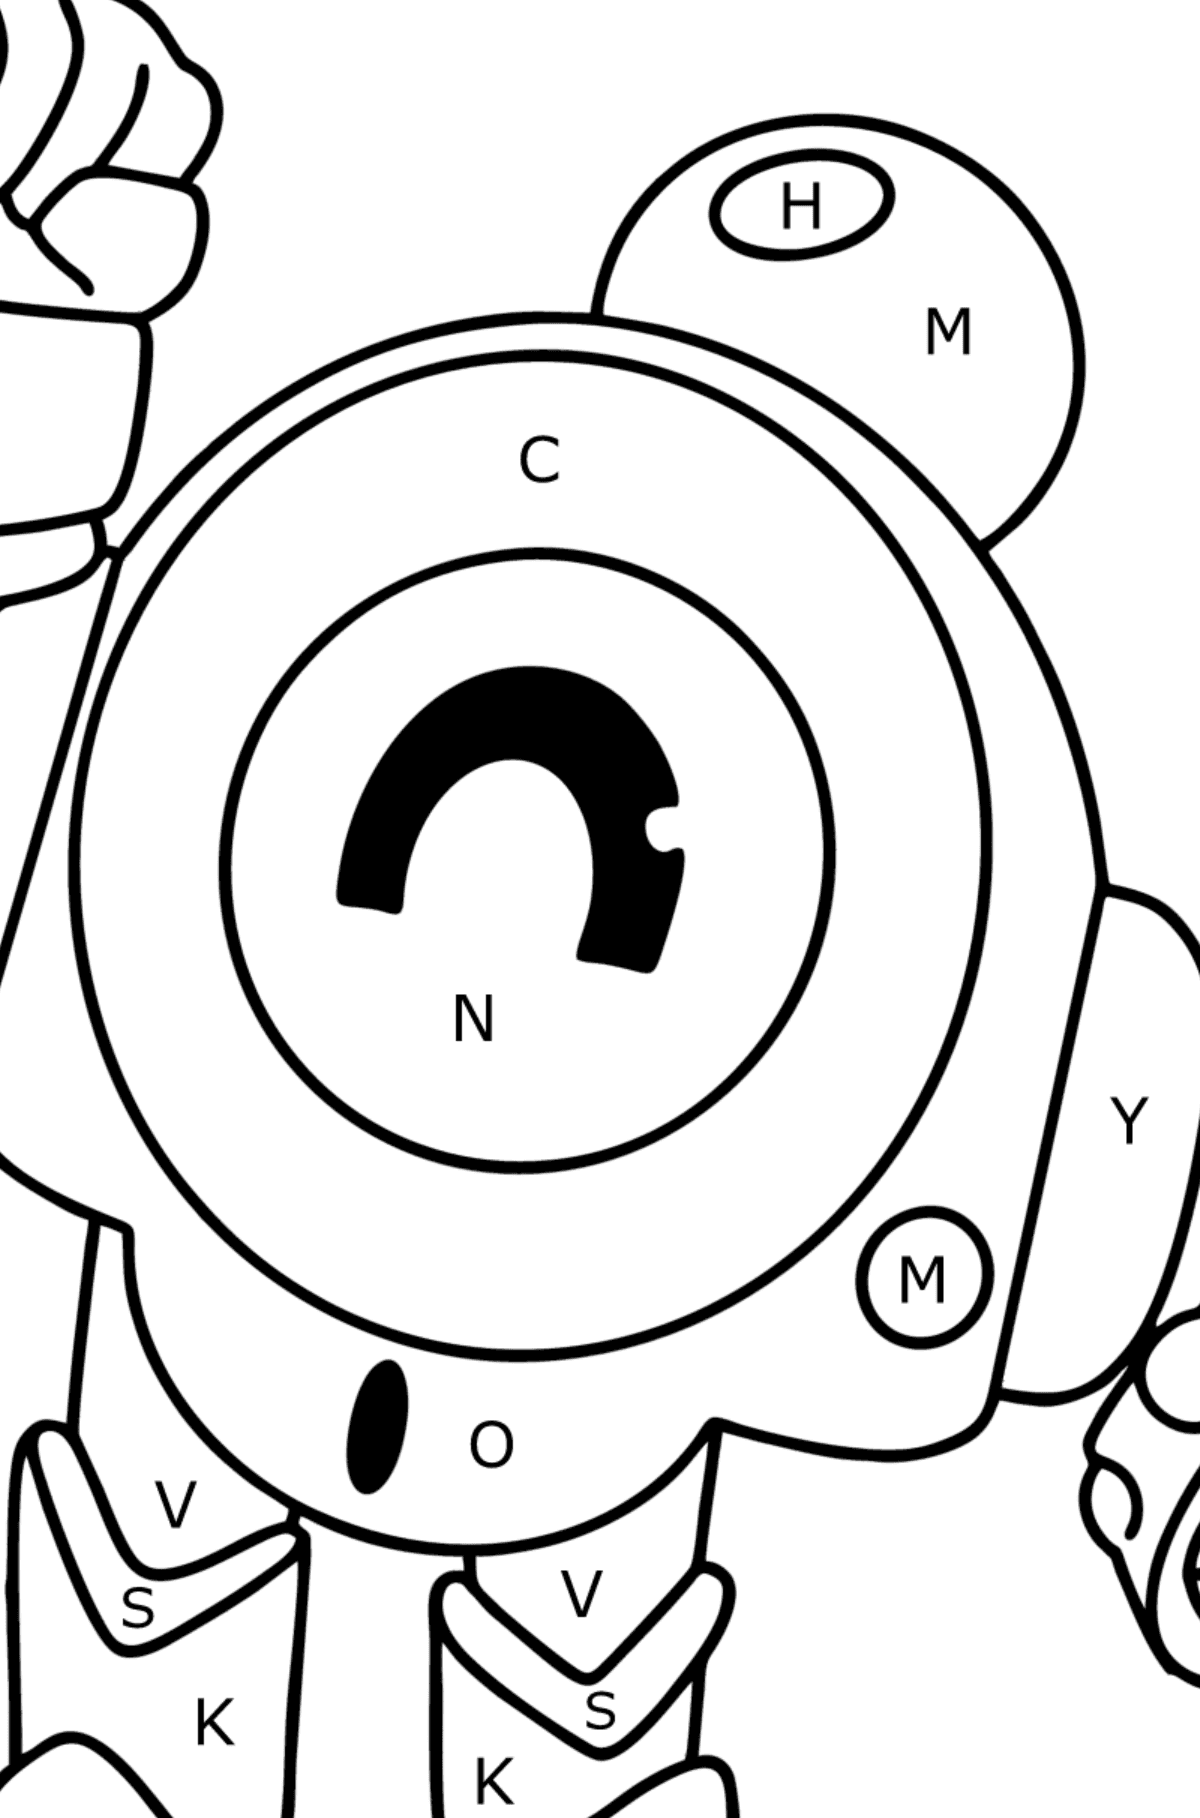 Brawl Stars Nani coloring page - Coloring by Letters for Kids